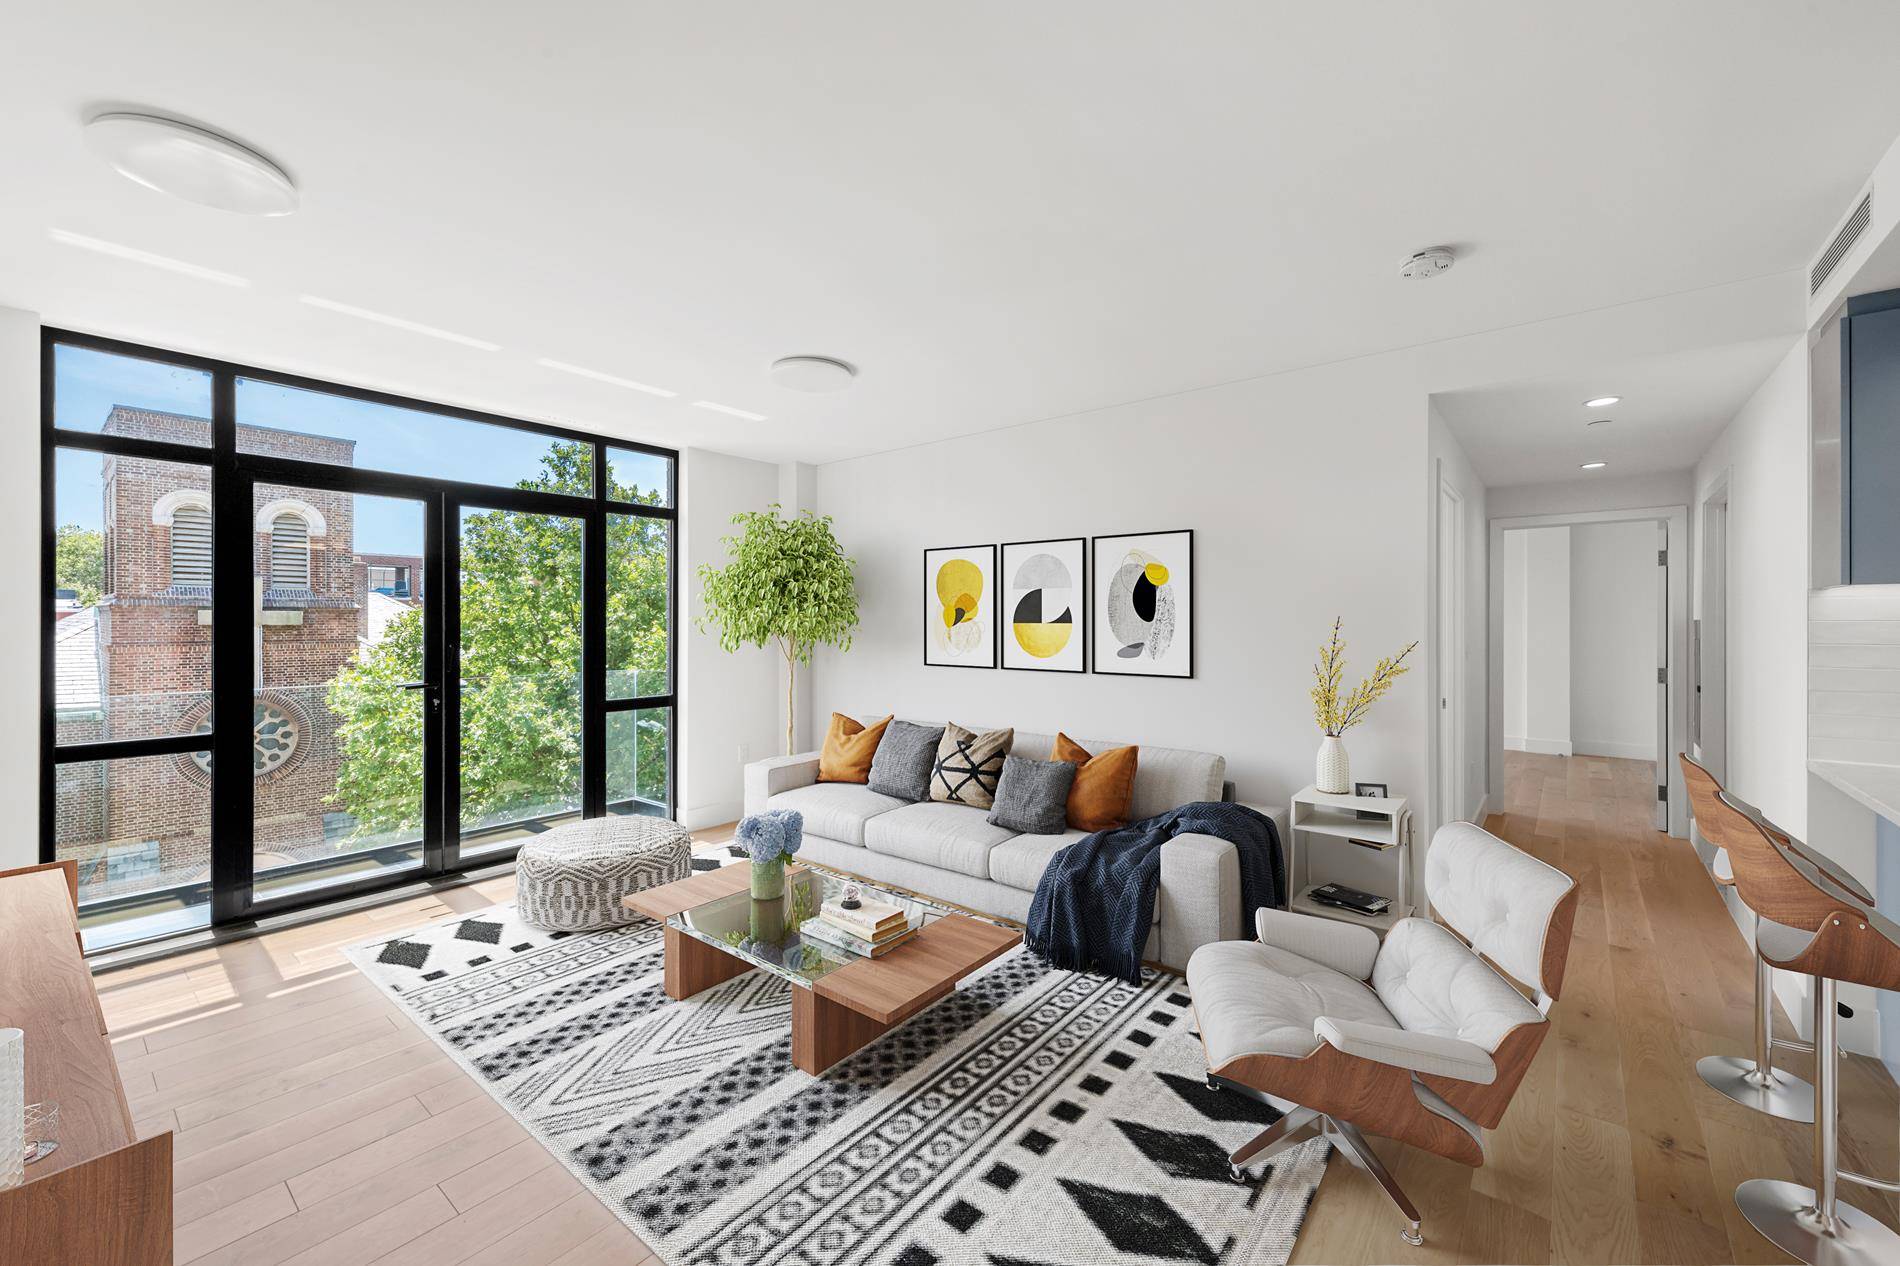 Brand New Condo With Prime Williamsburg LocationA luminous Williamsburg condo boasting elegant finishes and a thoughtful layout, this 2 bedroom, 1 bathroom home is a portrait of contemporary Brooklyn living.